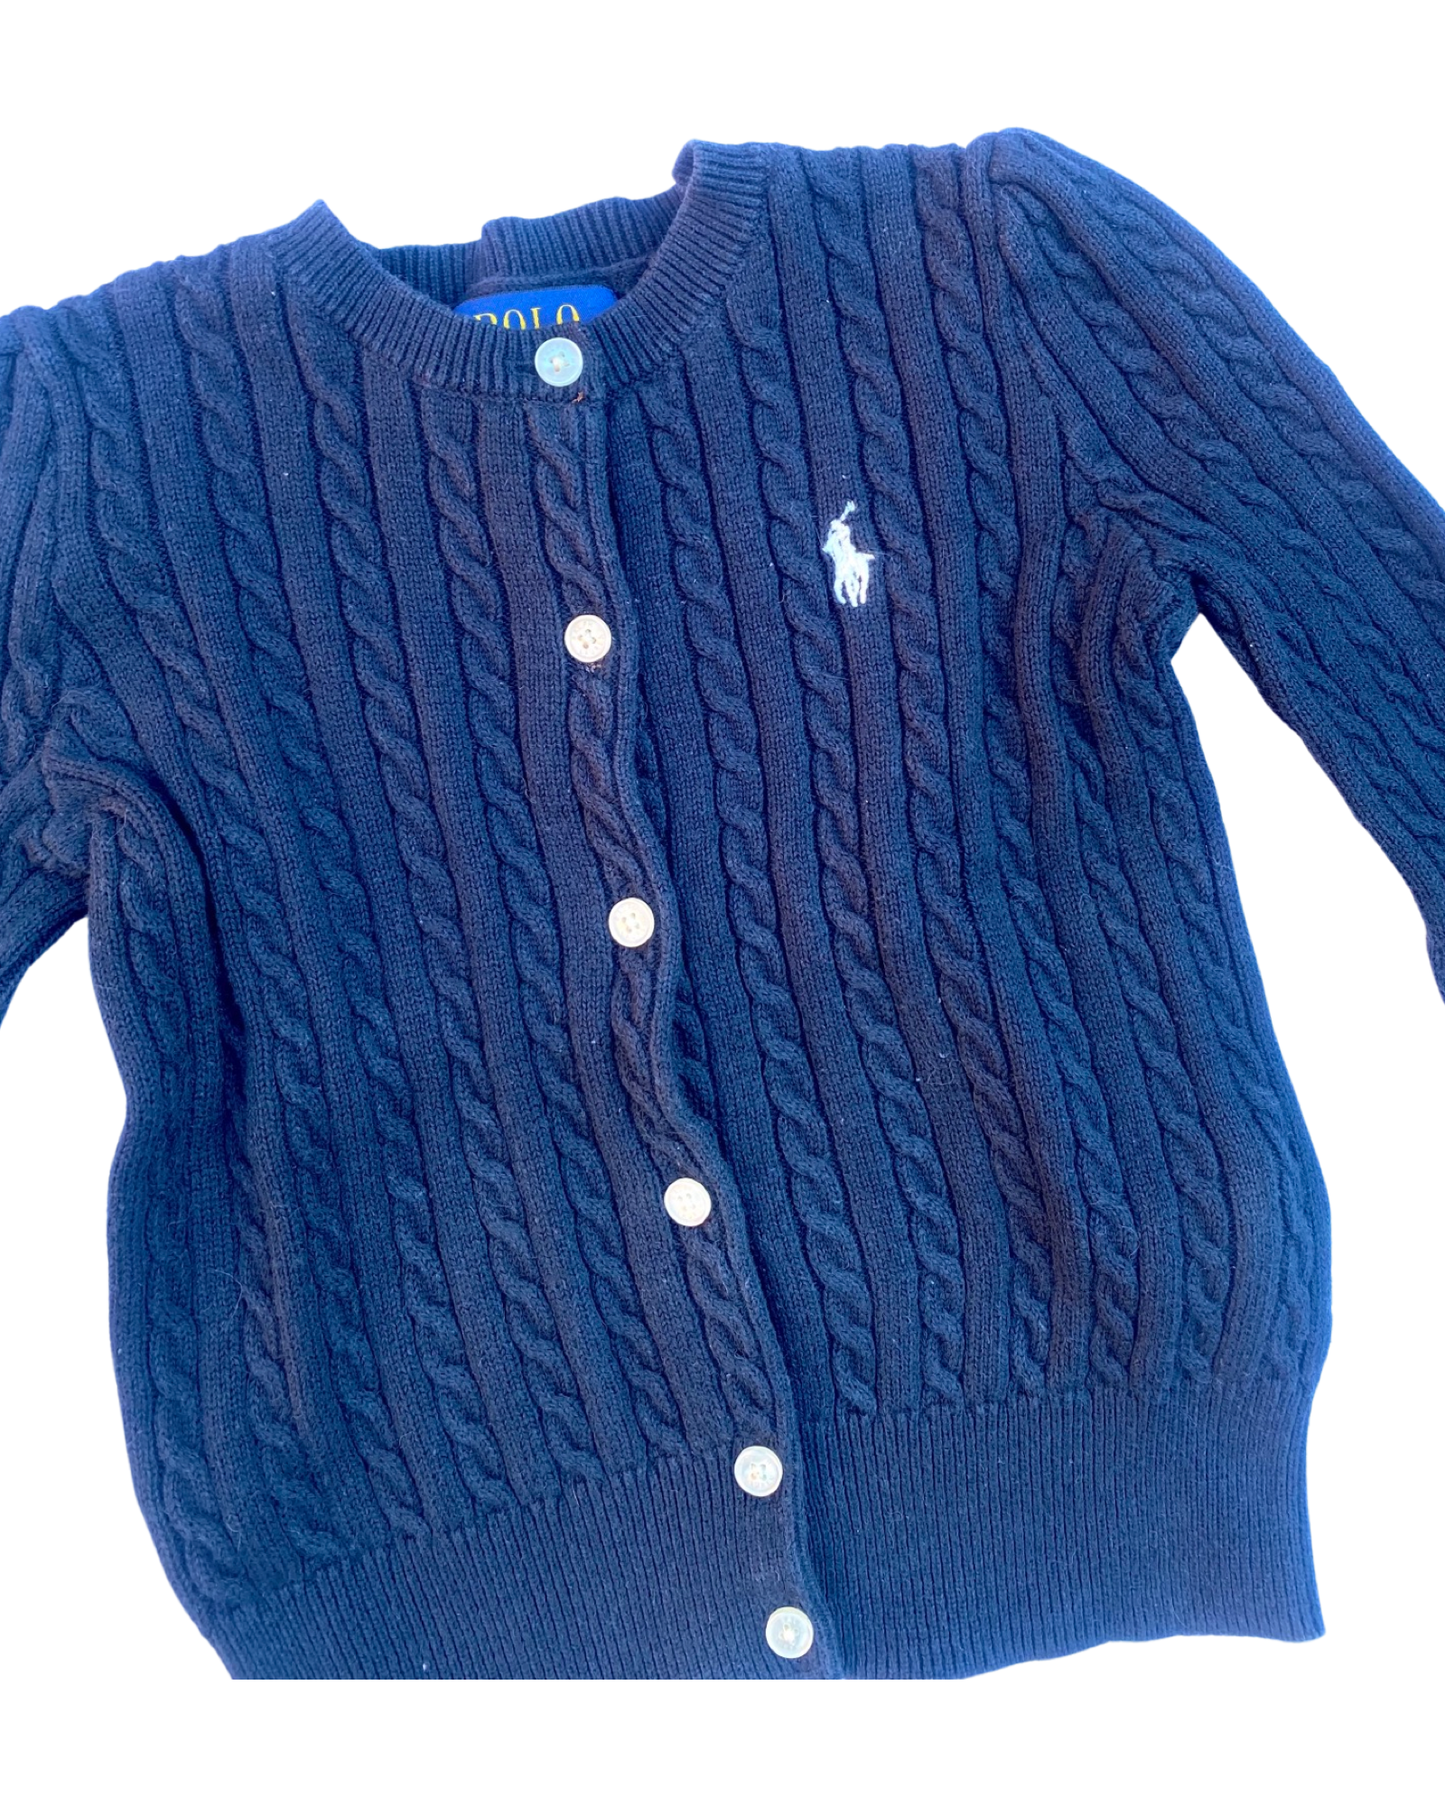 Ralph Lauren navy cable knit cardigan (1-2yrs)